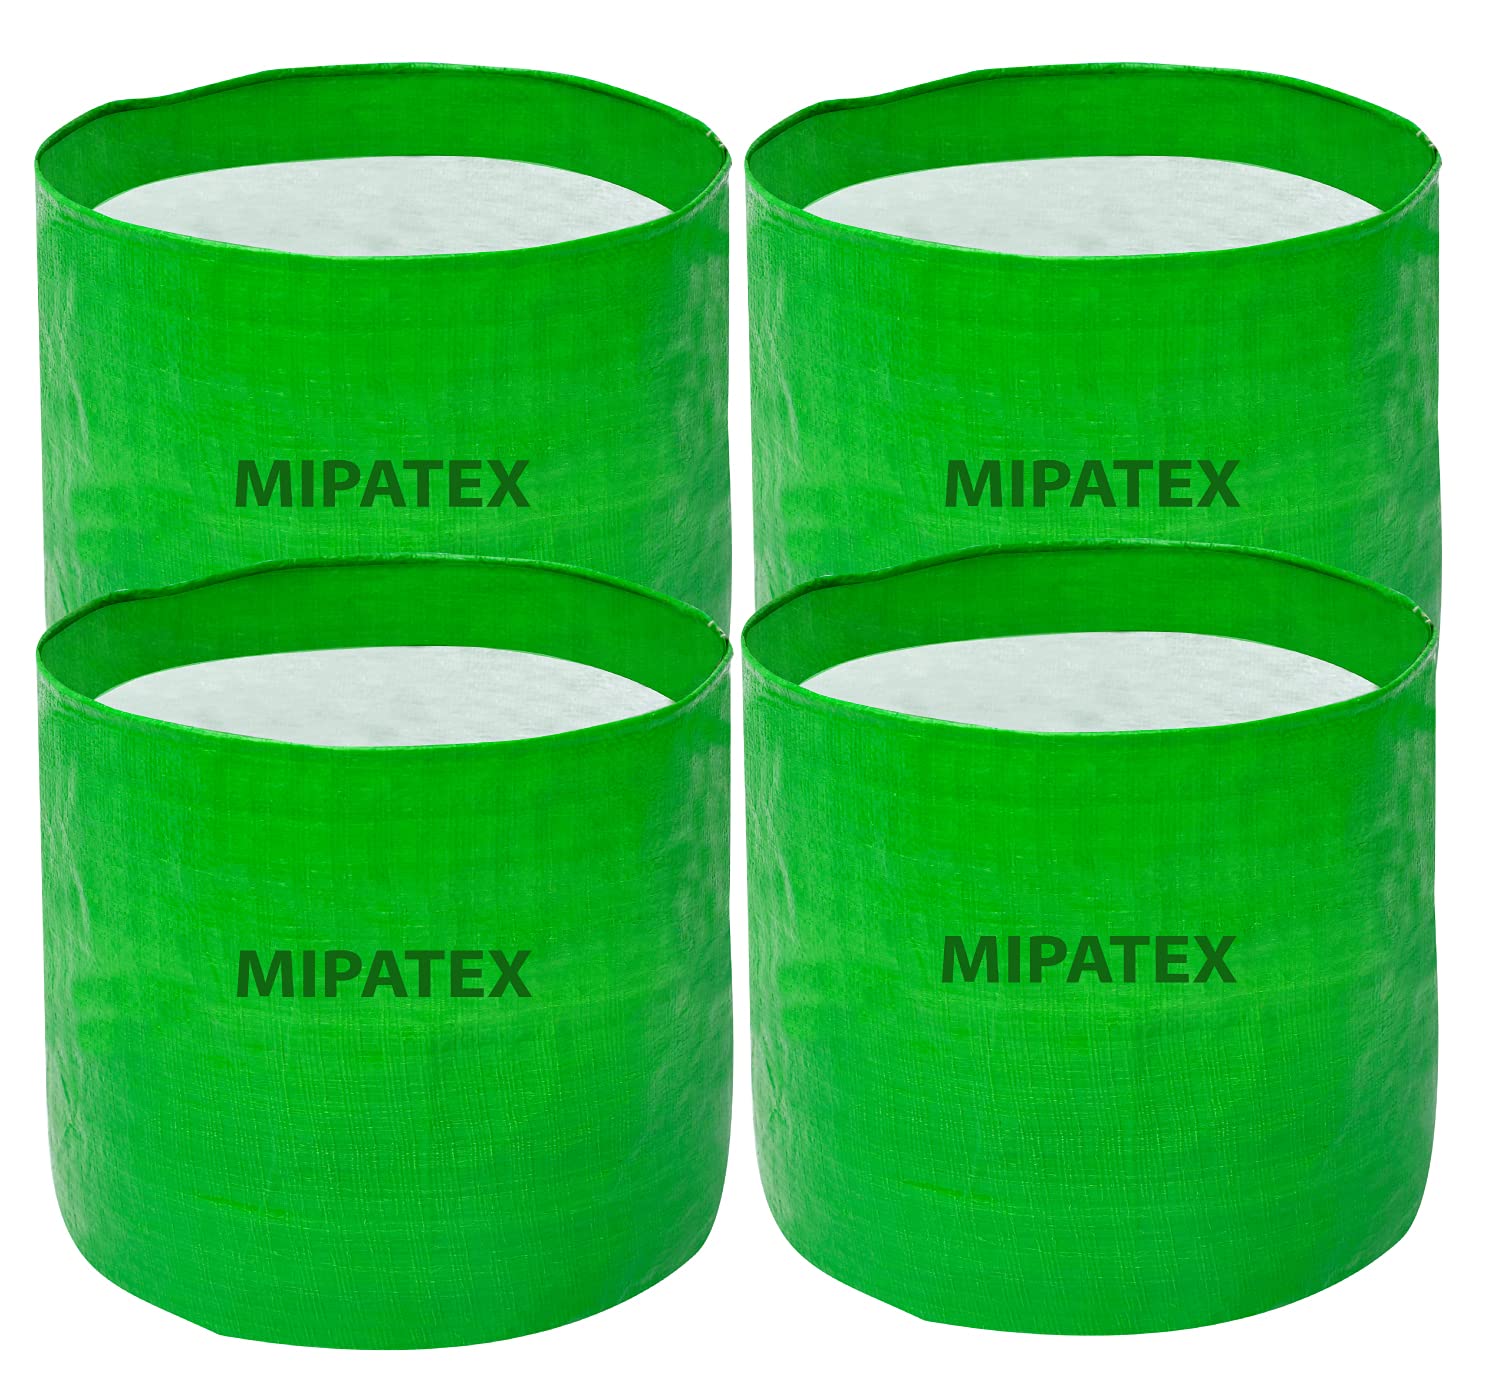 Mipatex Fabric Grow Bags (6x6 Inches)